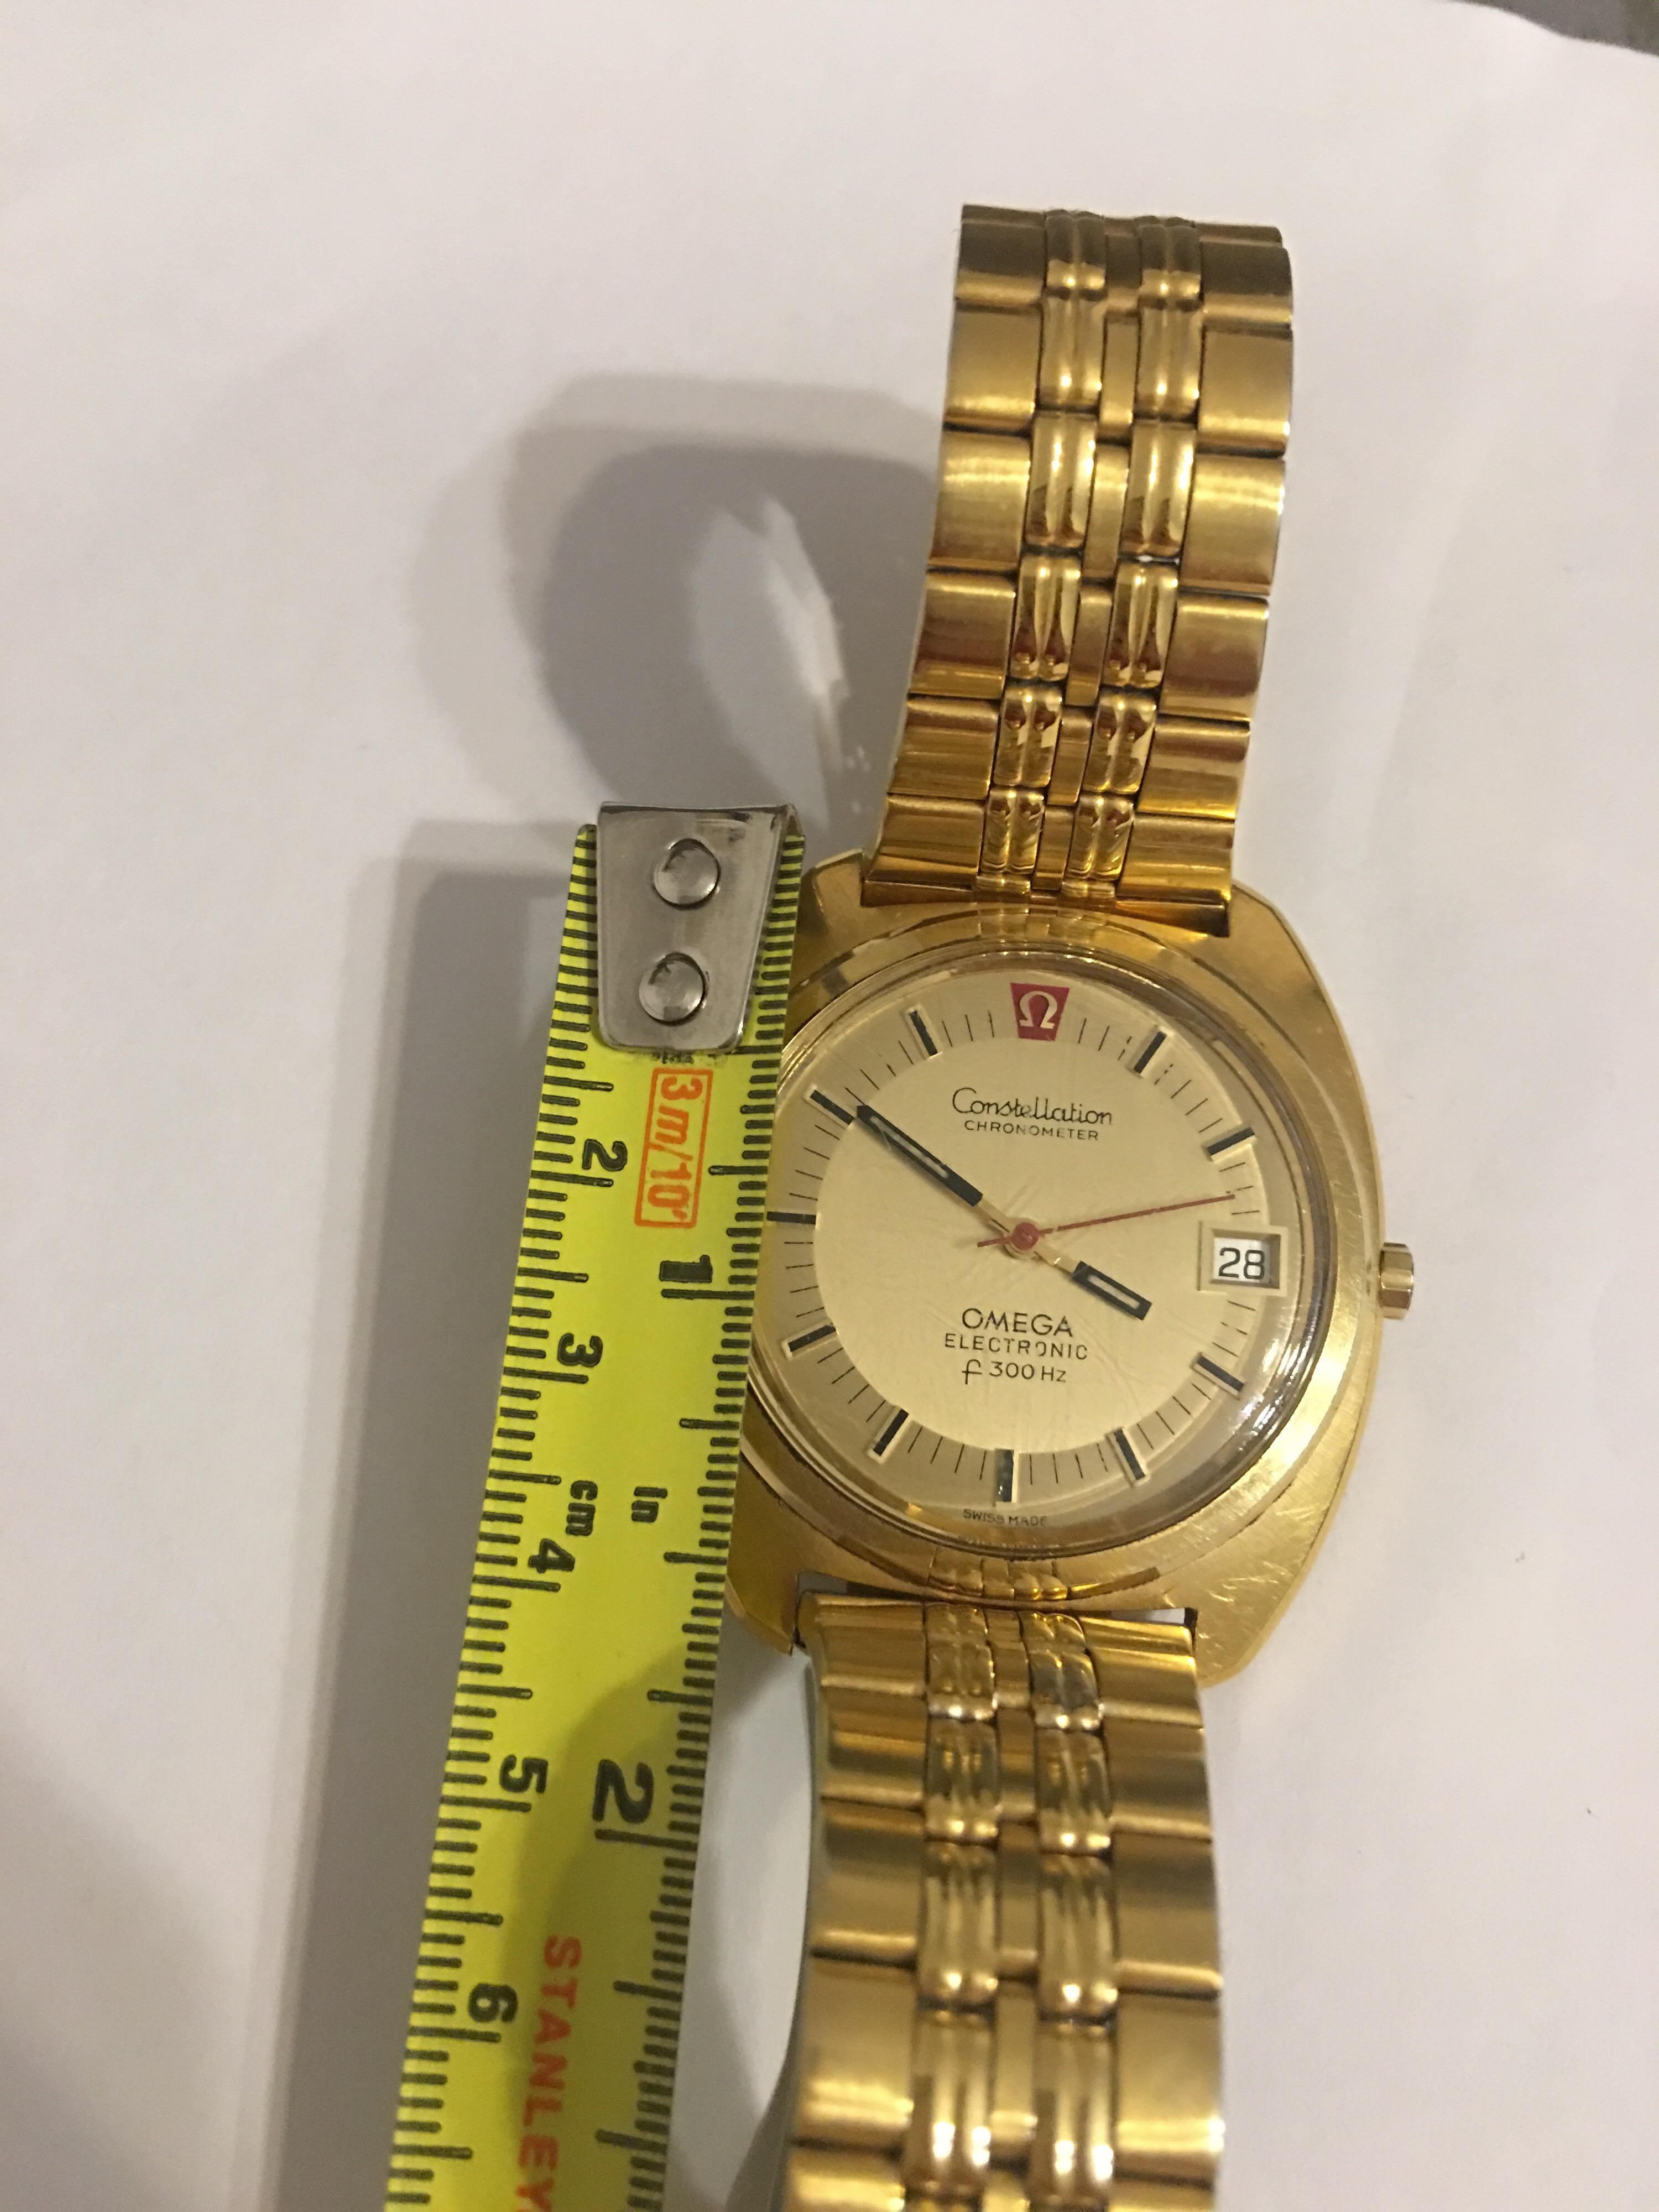 Vintage 1970s Omega Constellation F300HZ Gold-Plated Electronic Watch 4